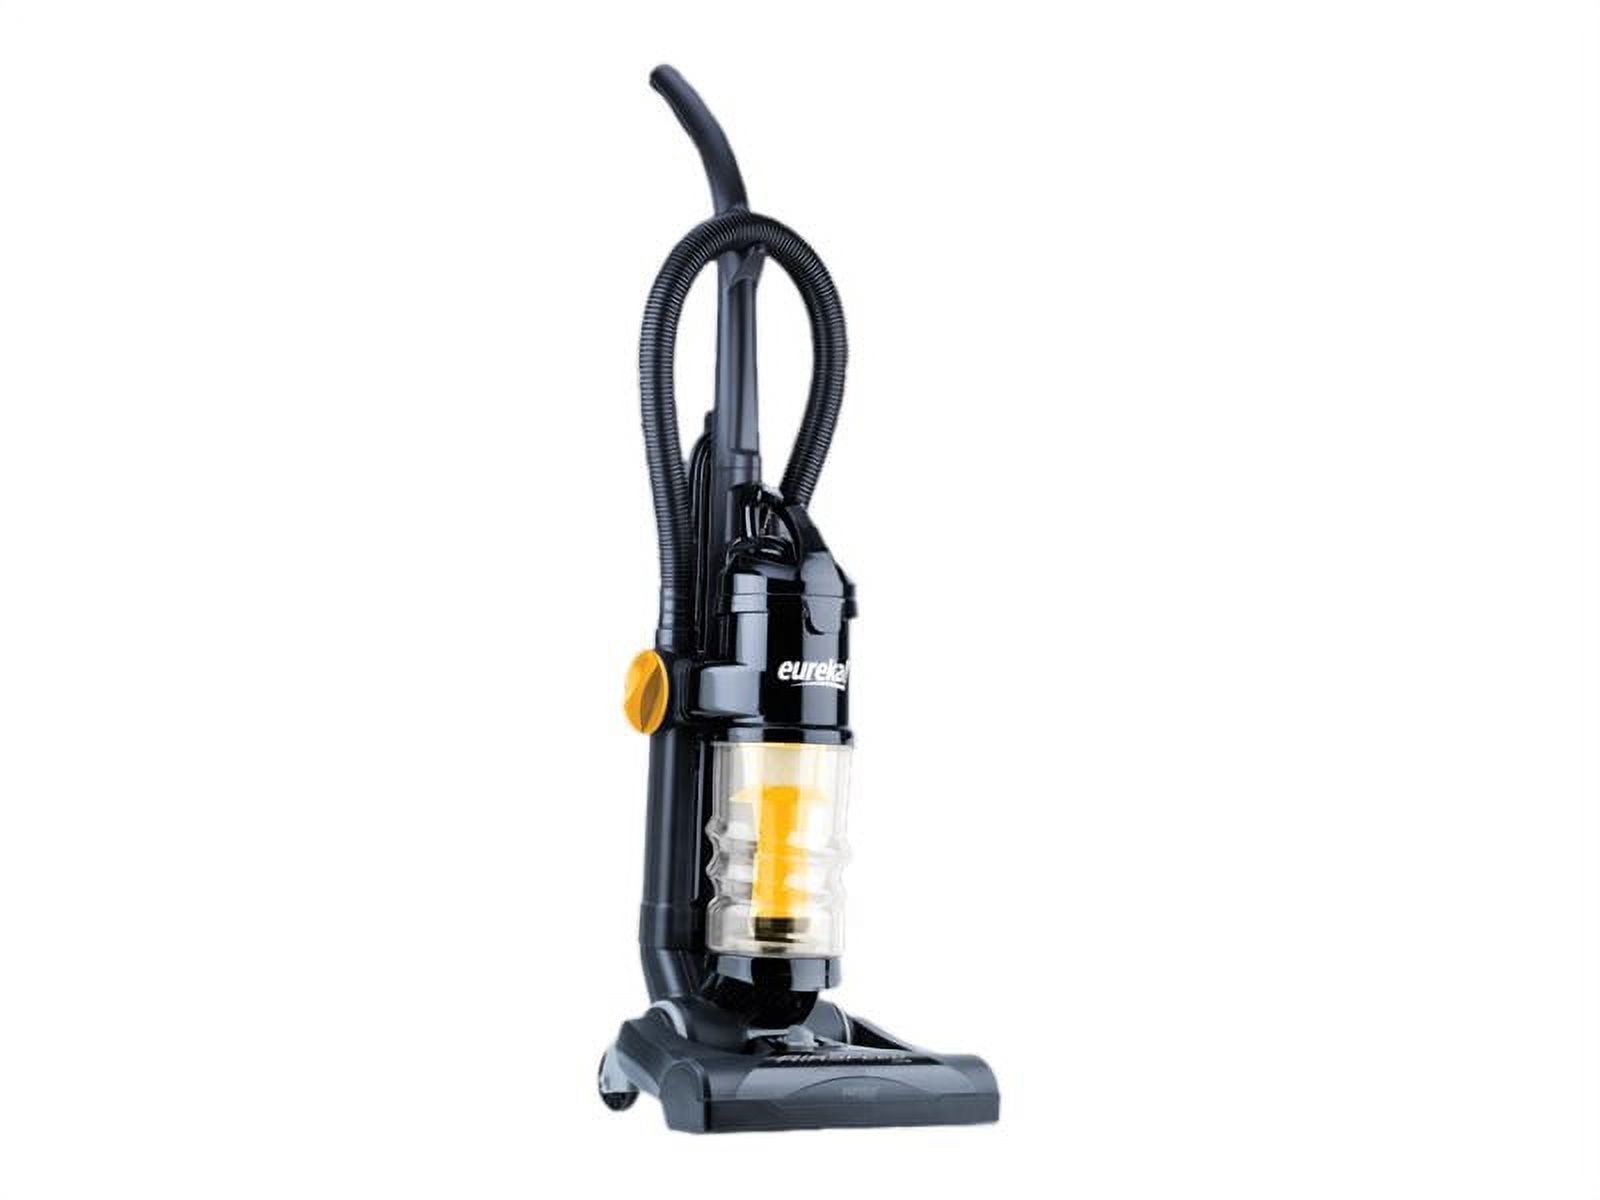 Eureka AirSpeed ONE AS2013A - Vacuum cleaner - upright - bagless - black/yellow - image 2 of 4